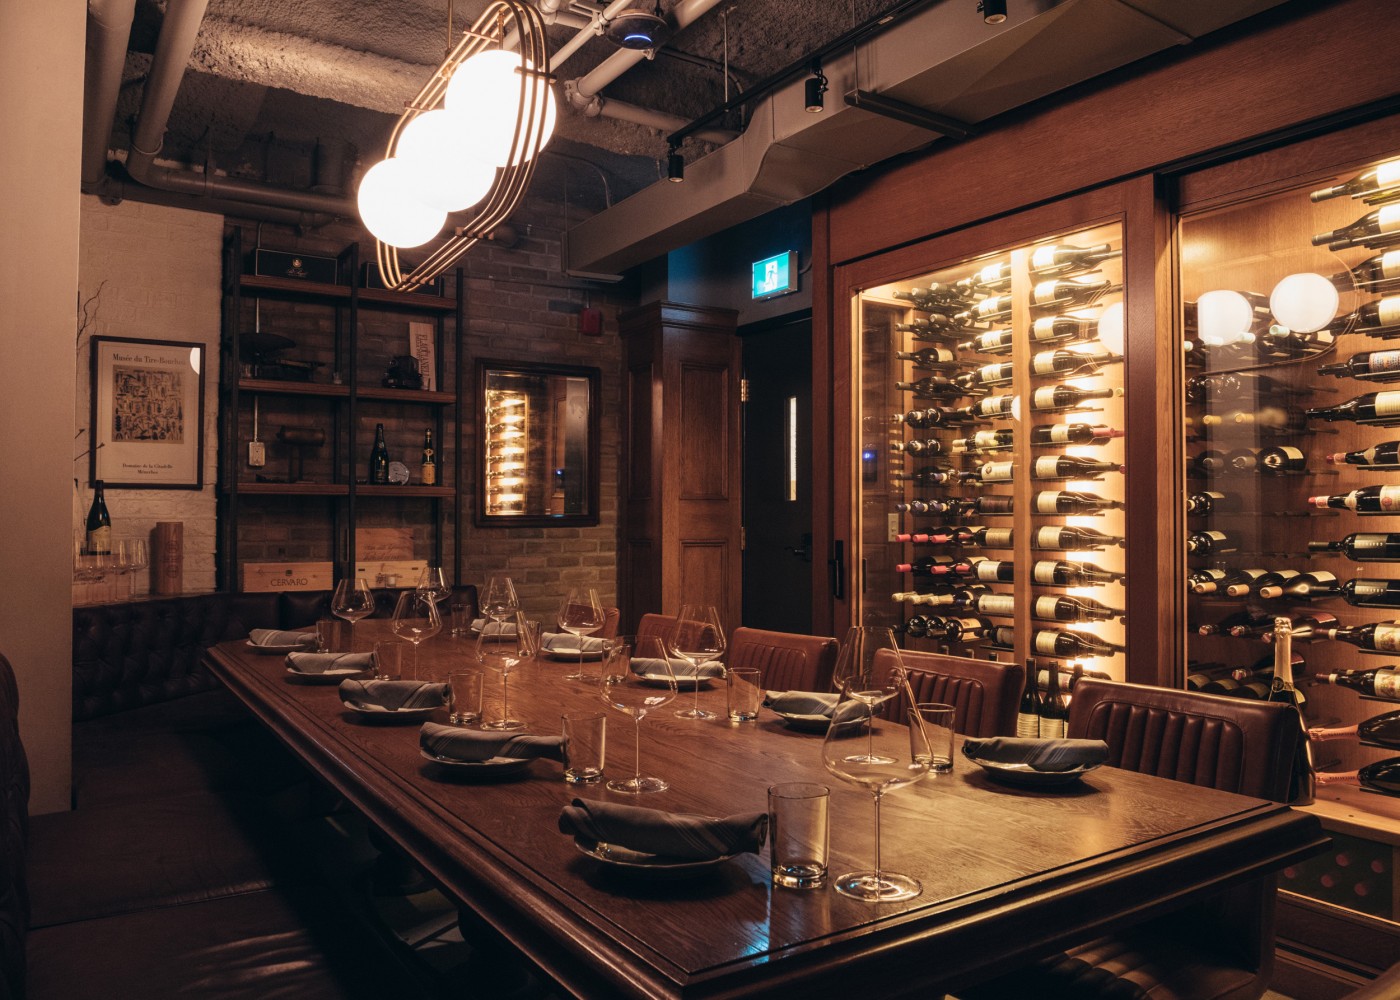 Private dining cellar table with tufted plush seating and shelving with wine bottles.